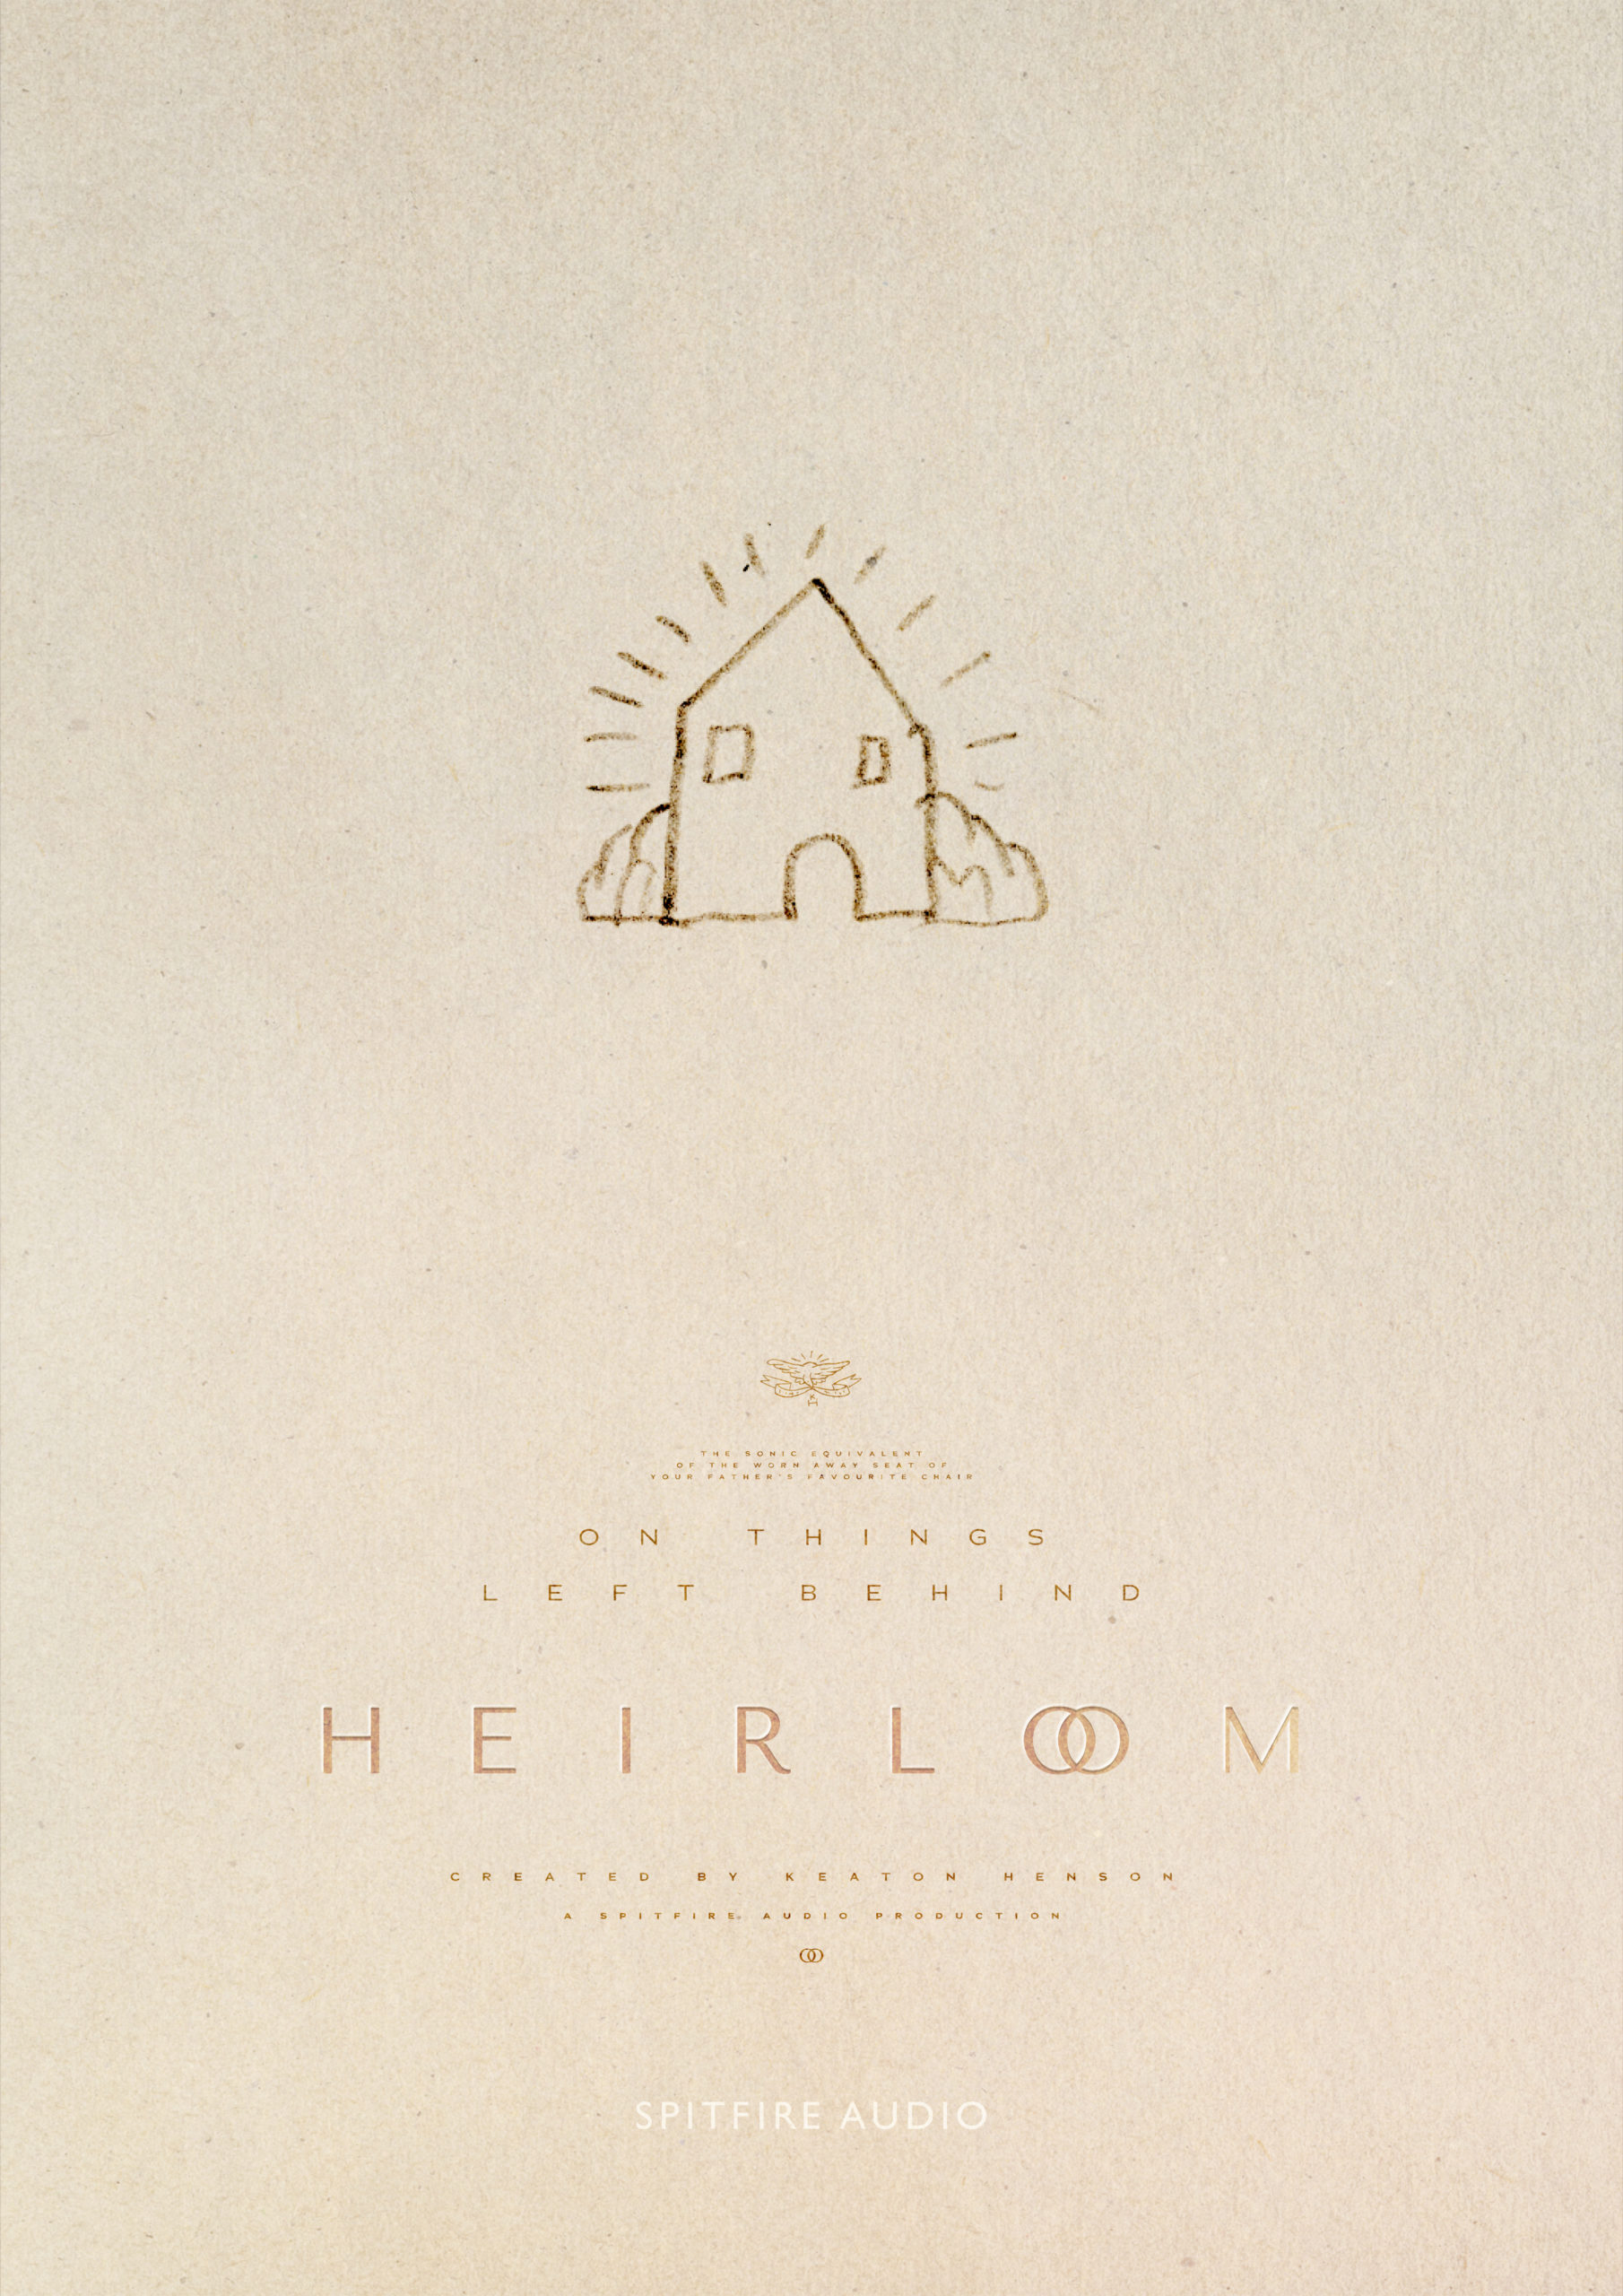 Heirloom: The Emotional Ensemble with a Beautiful Human Touch